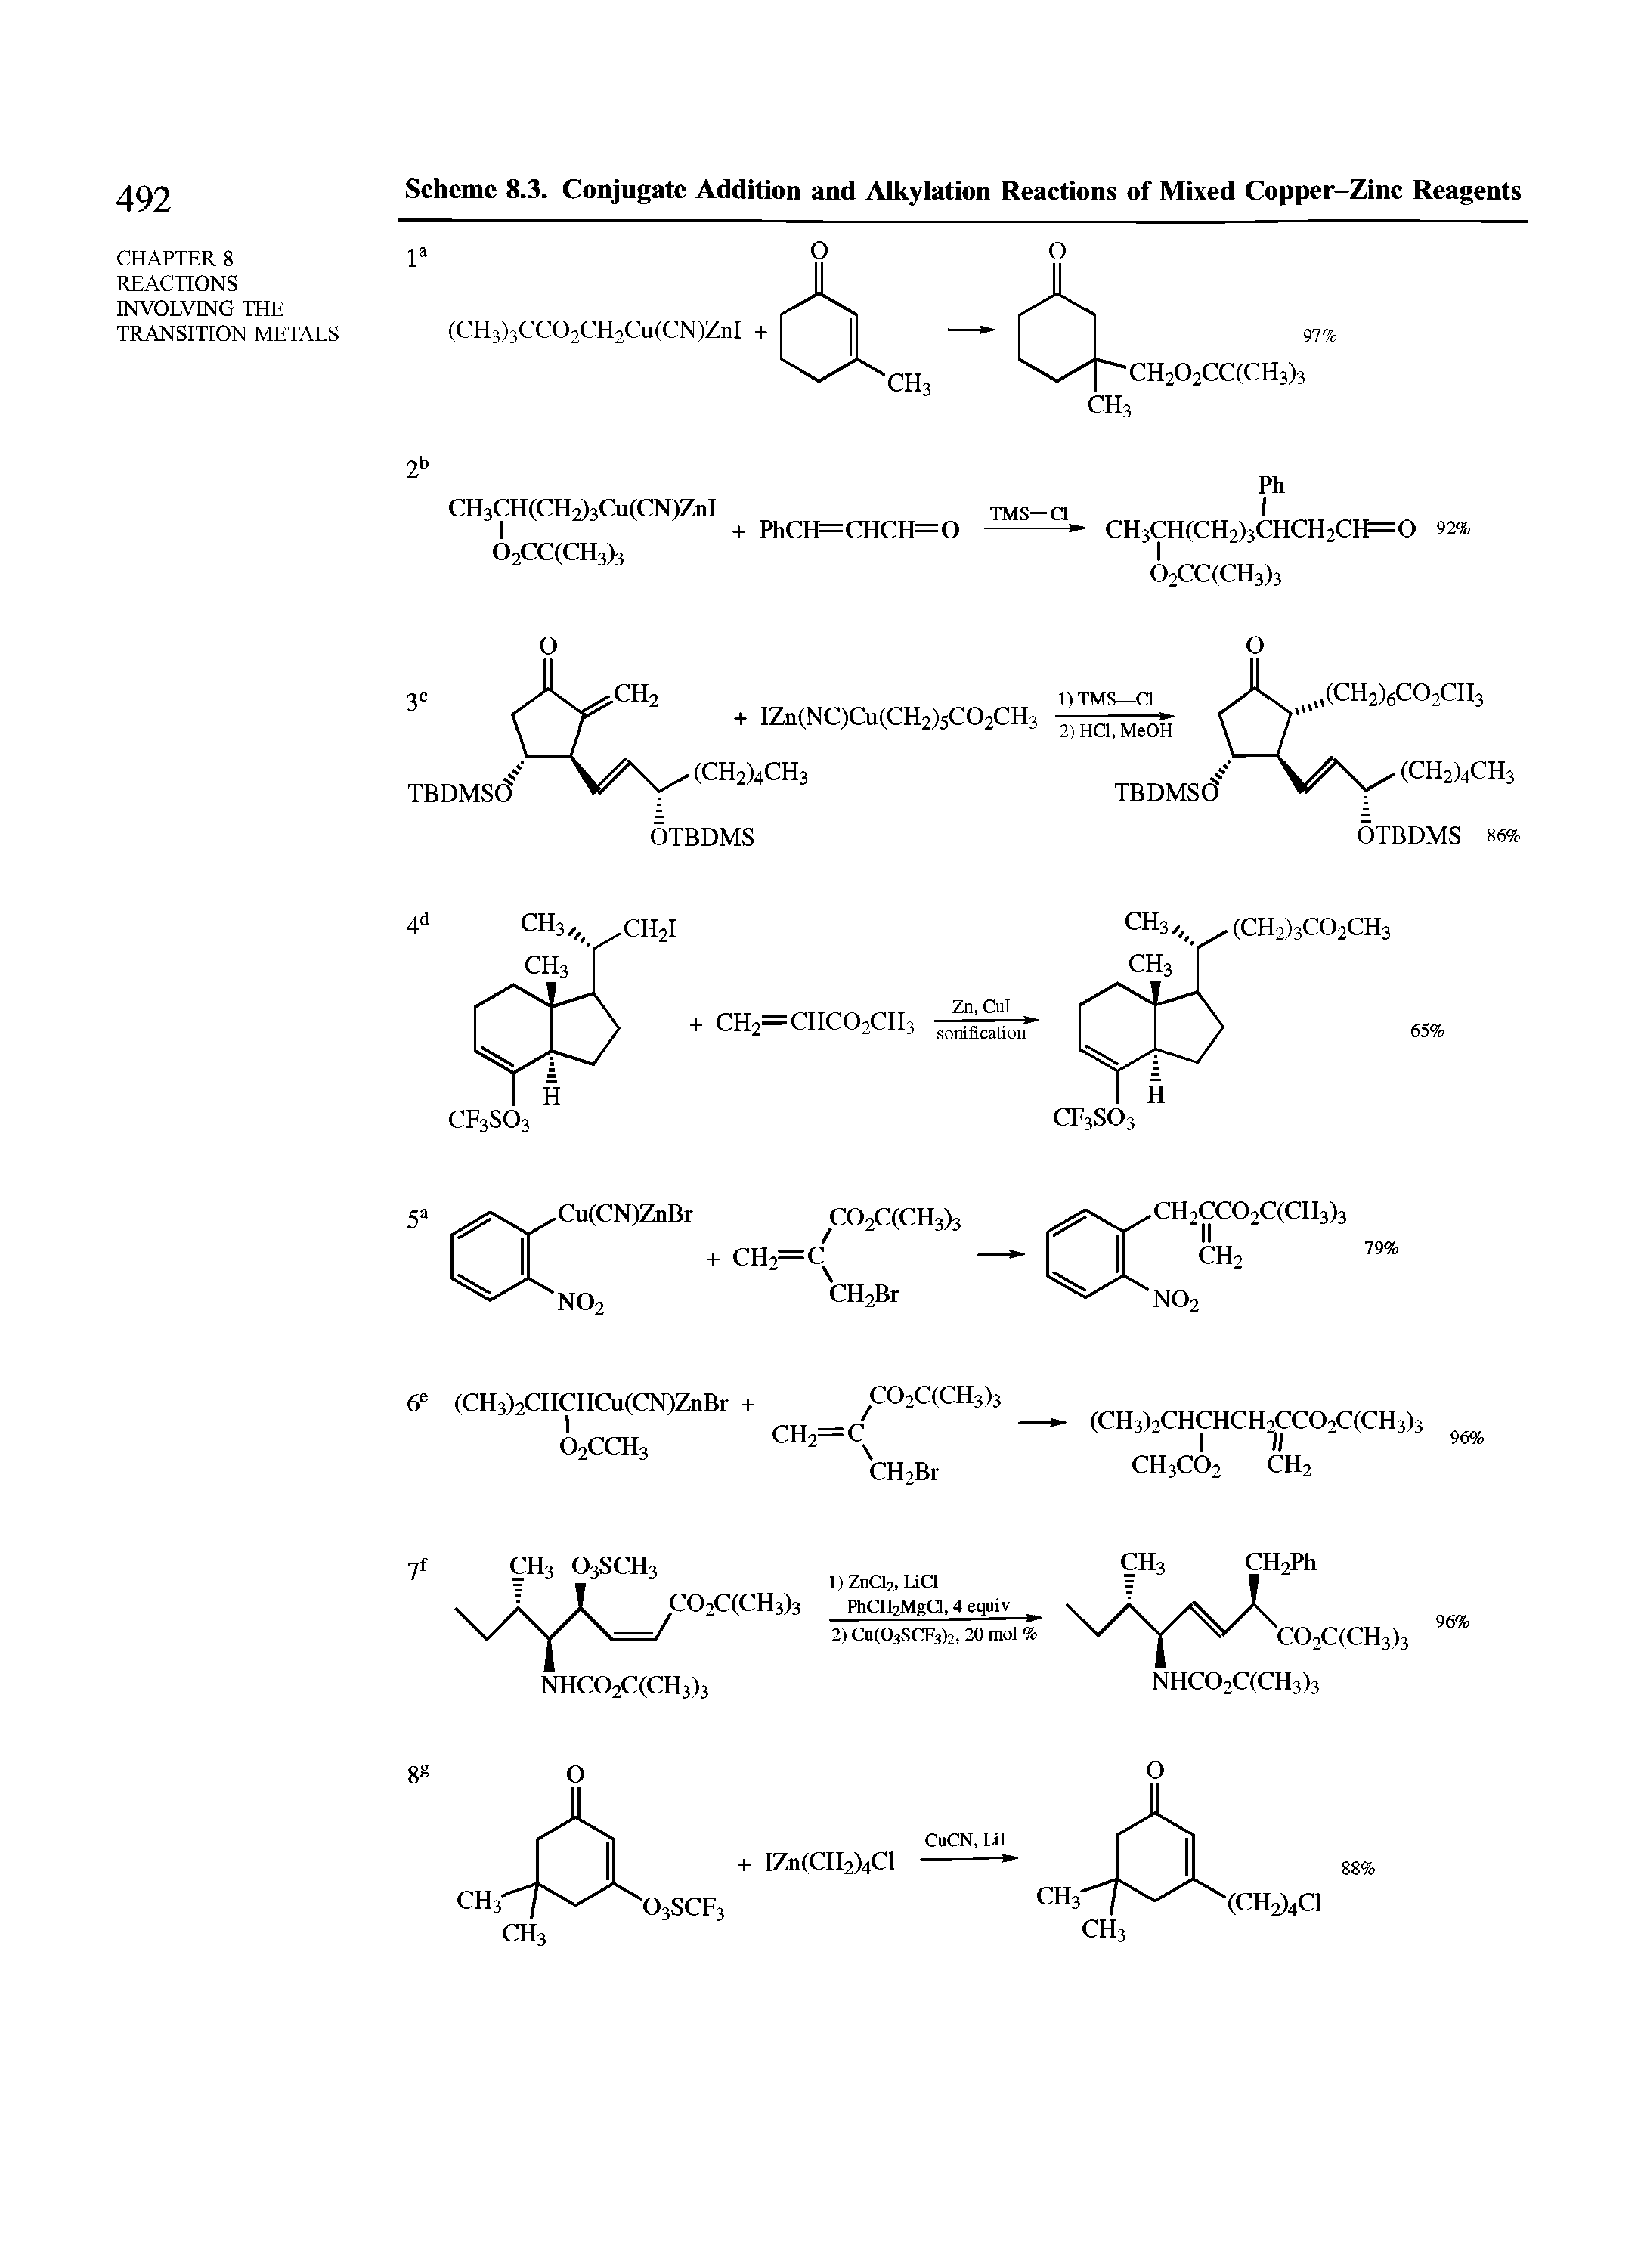 Scheme 8.3. Conjugate Addition and Alkylation Reactions of Mixed Copper-Zinc Reagents...